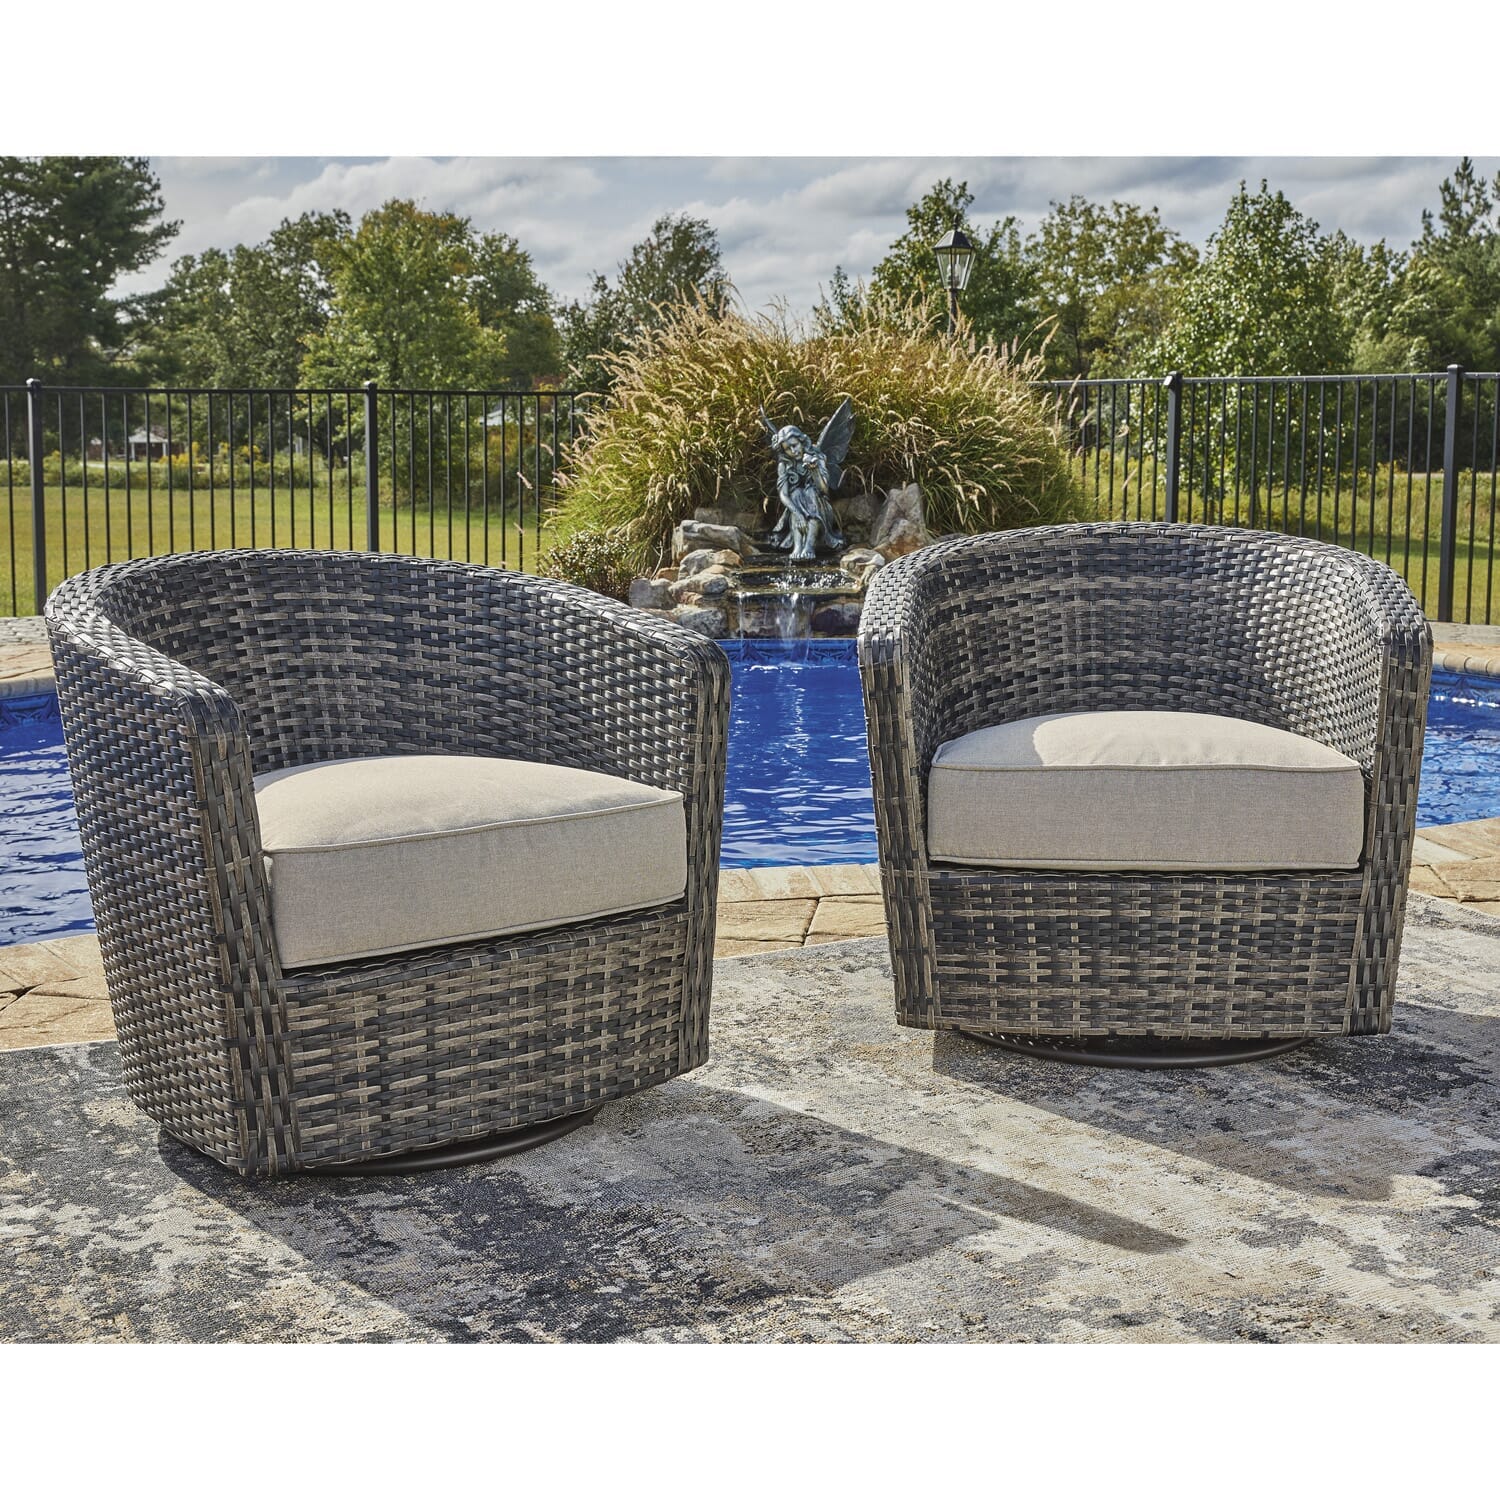 Blue Sky S/2 outdoor swivel chair with resin wicker and an upholstered cushion in a neutral tone